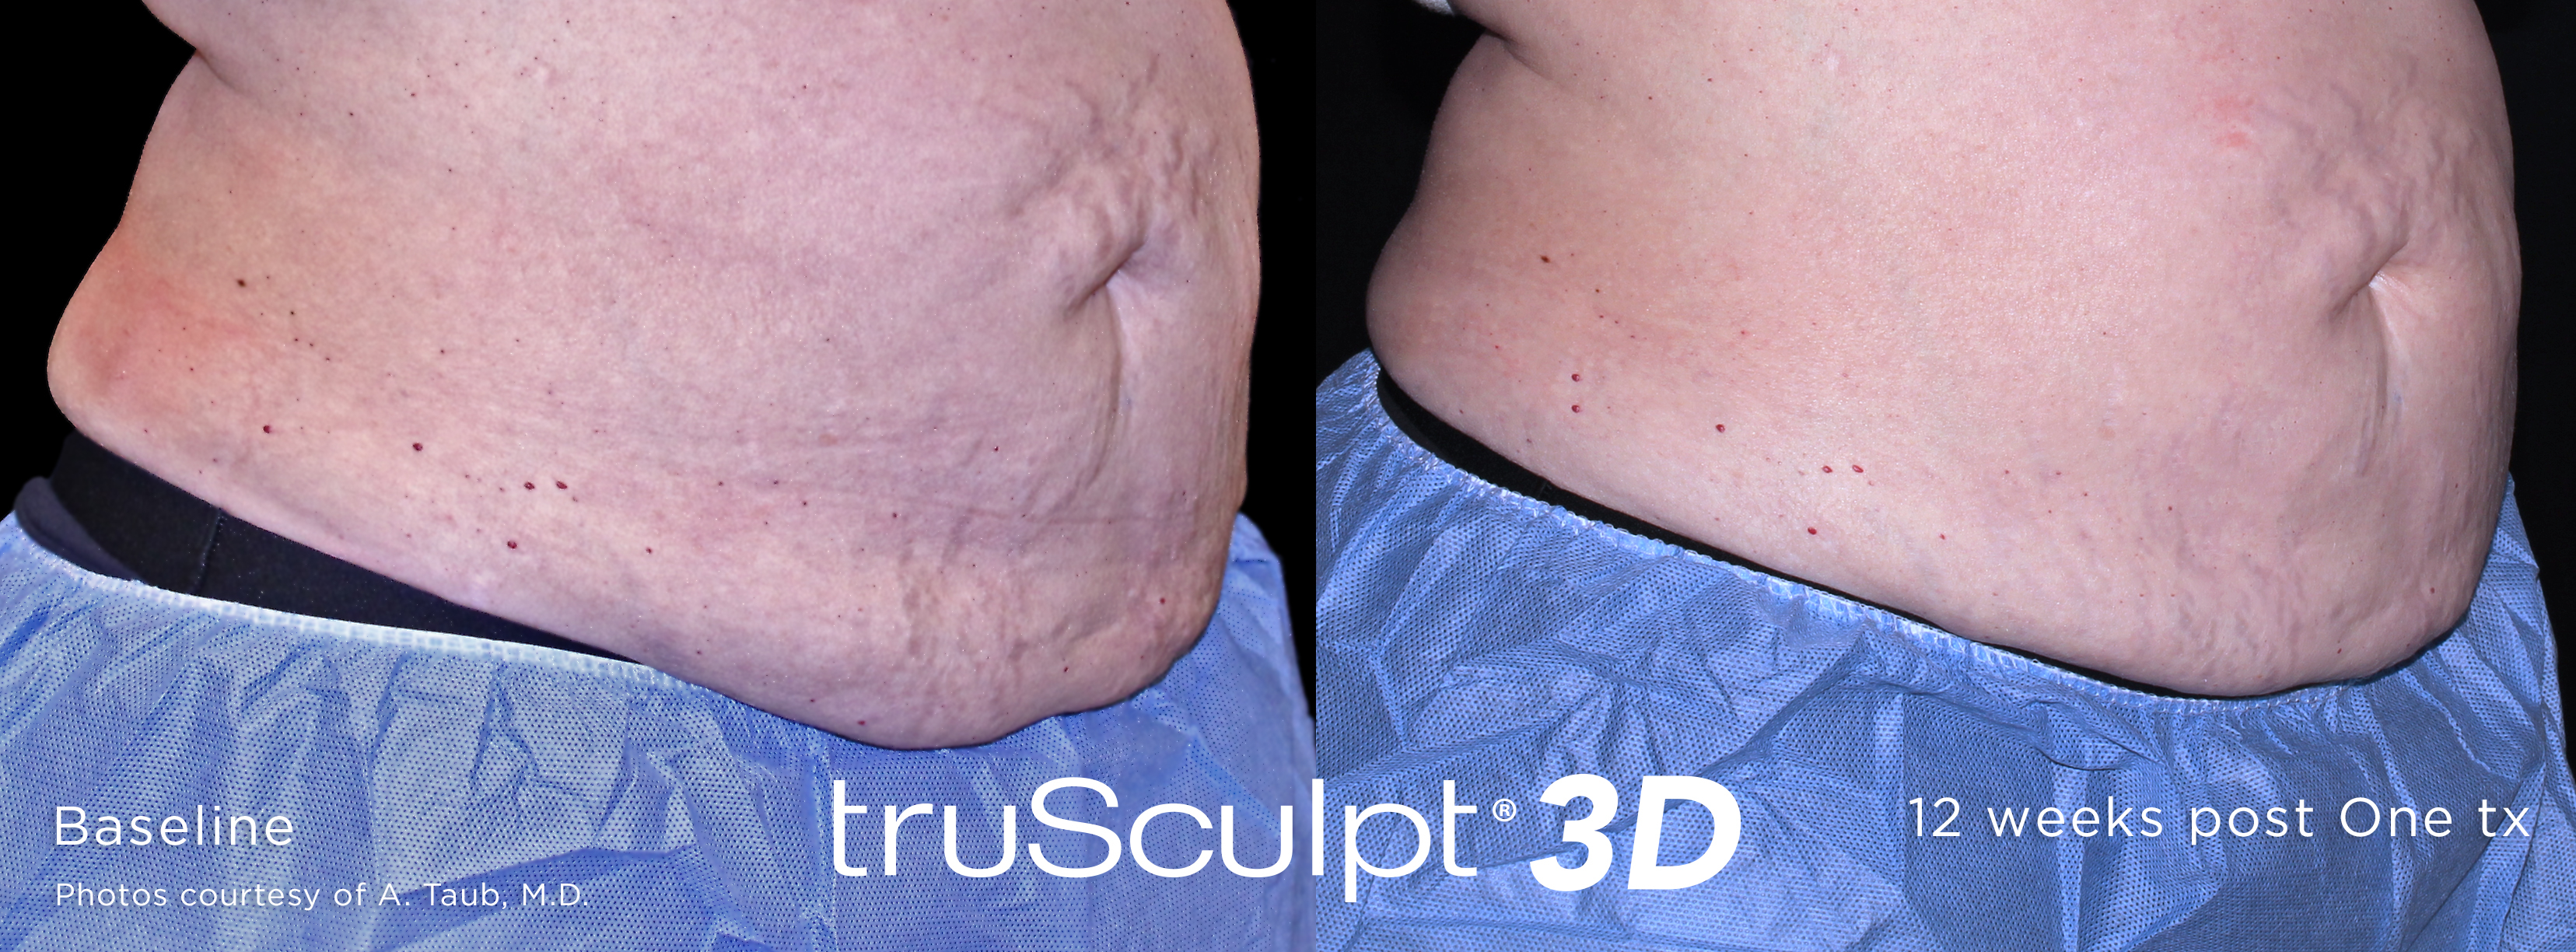 stomach reduction with Trusculpt 3D